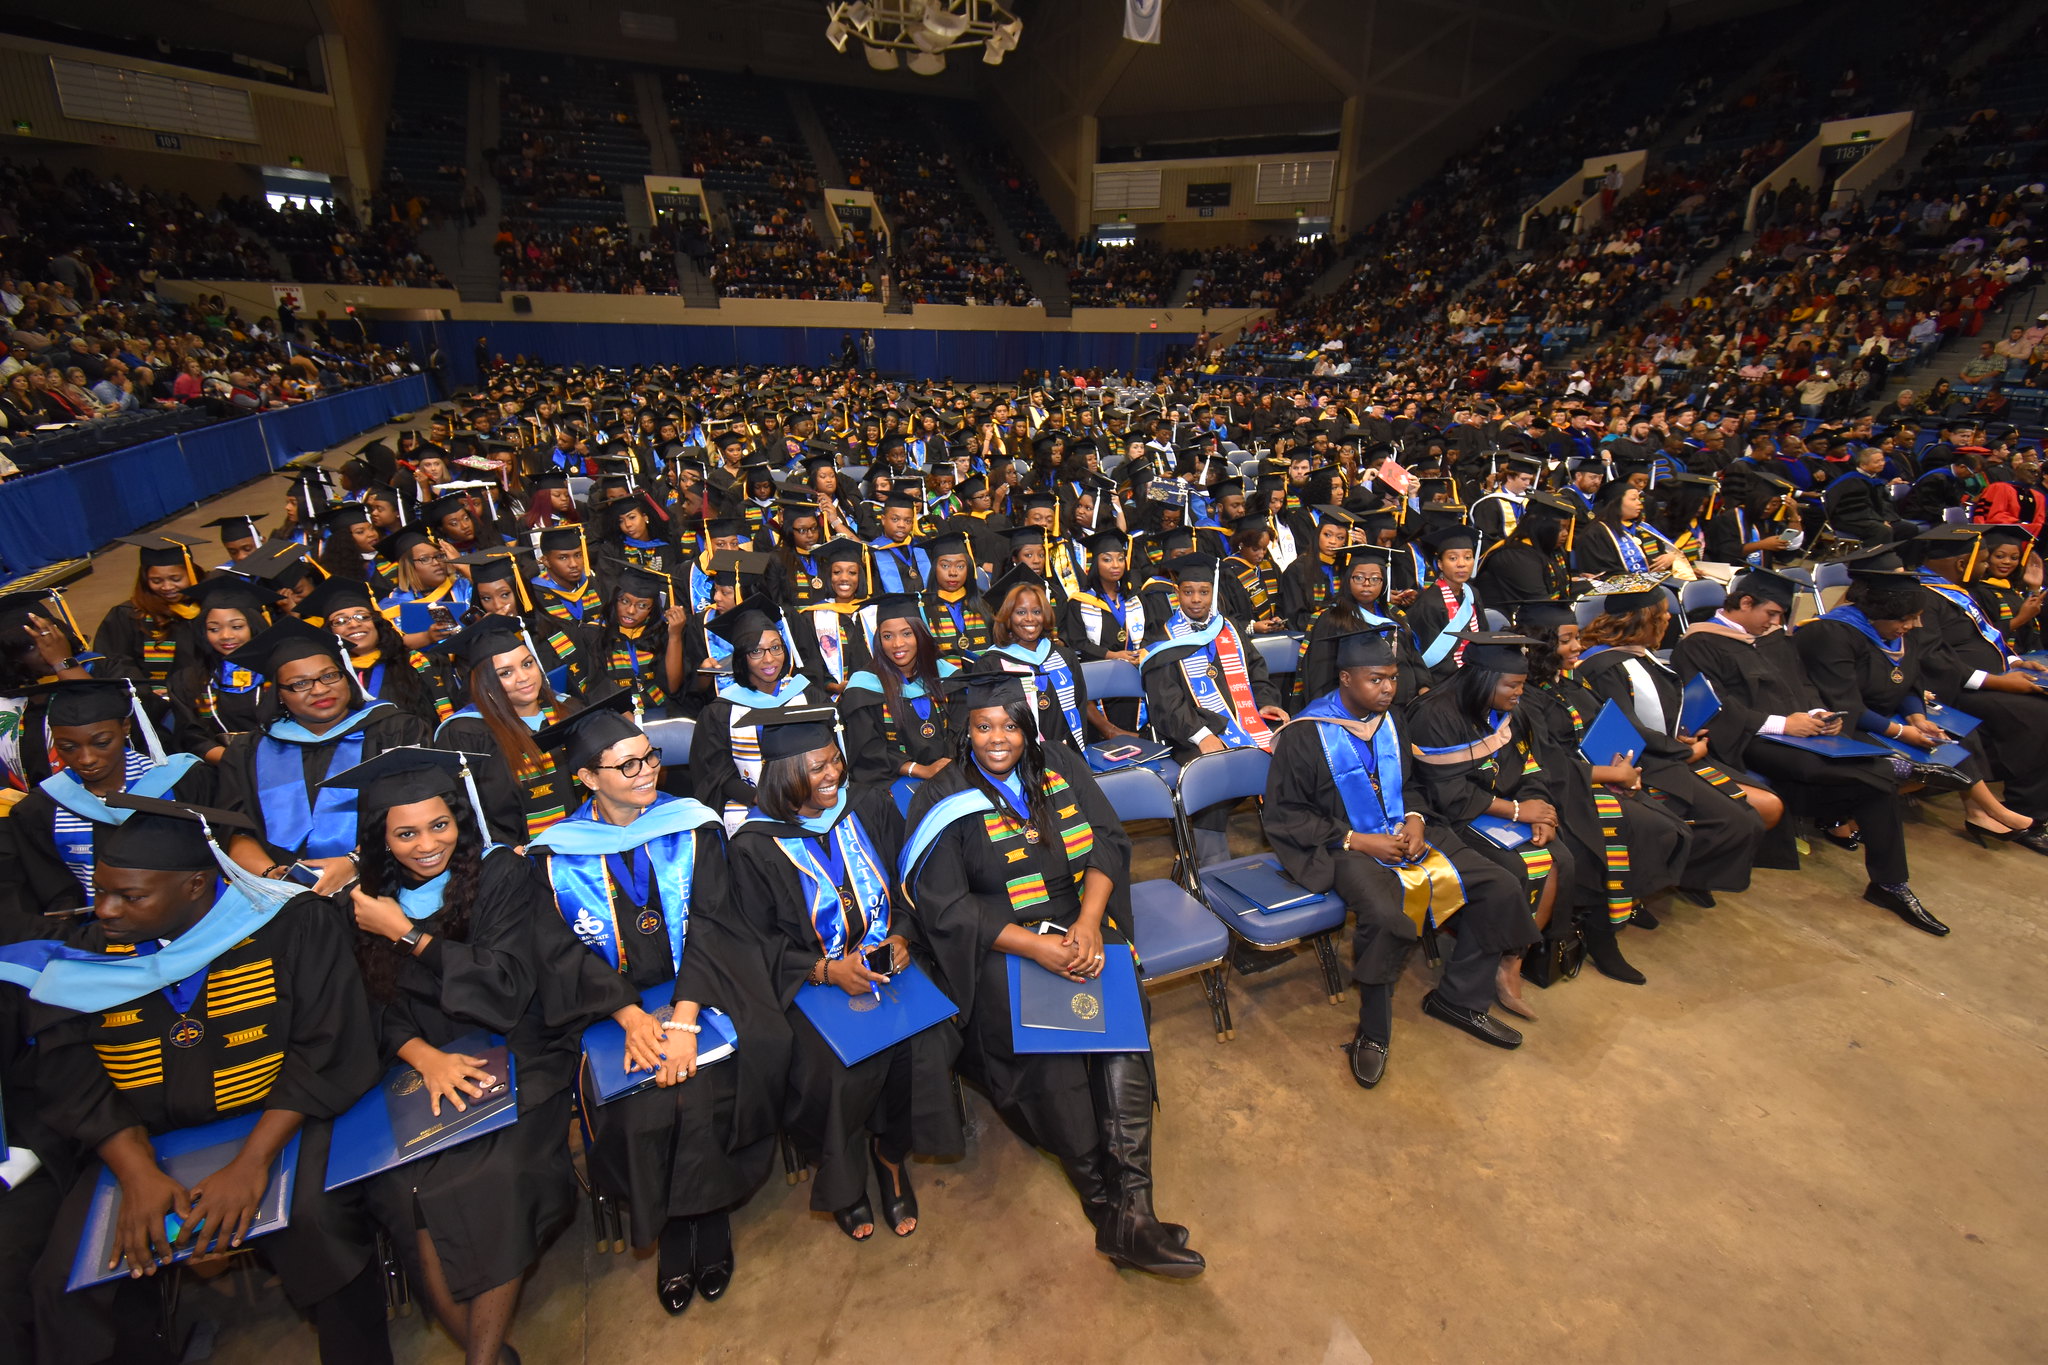 Albany State University 2019 Spring Commencement to be held May 11